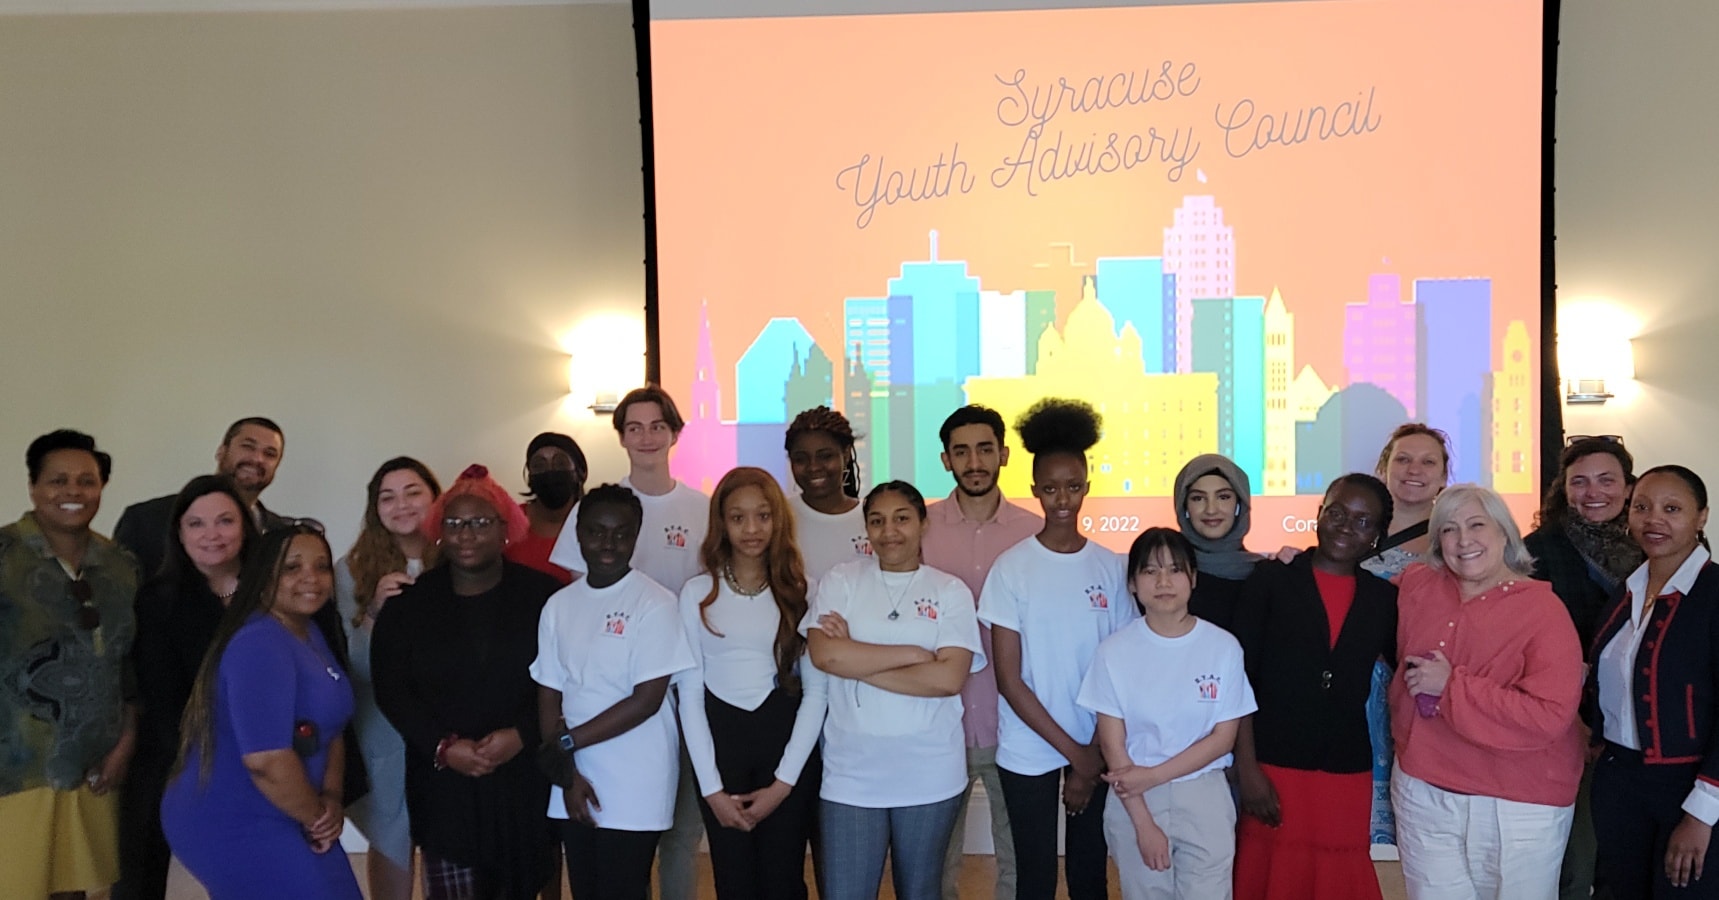 This is a group photo of all members of the Syracuse Youth Advisory Council, standing in front of a slide projection that reads 'Syracuse Youth Advisory Council.'